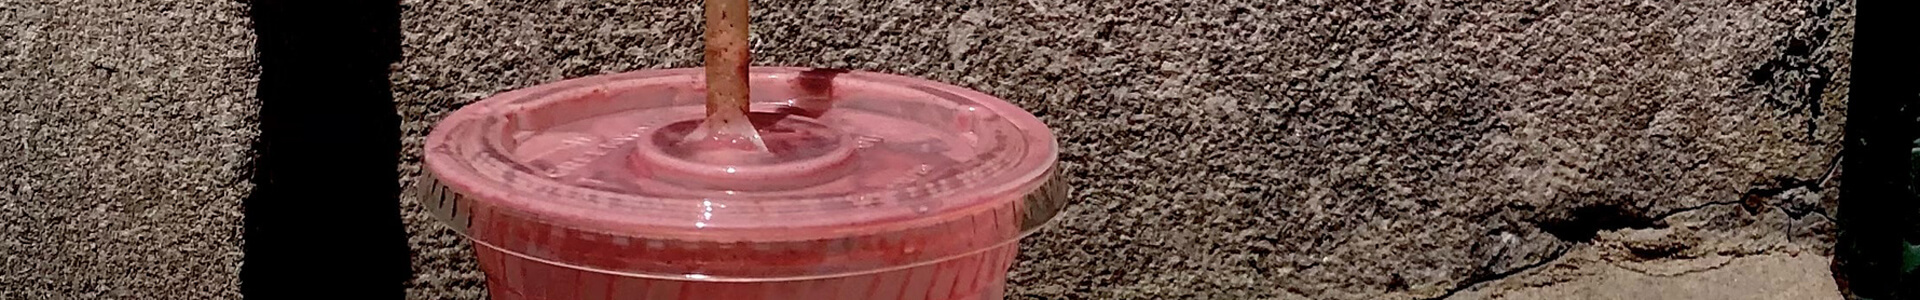 Pink colored drink in a large plastic cup.